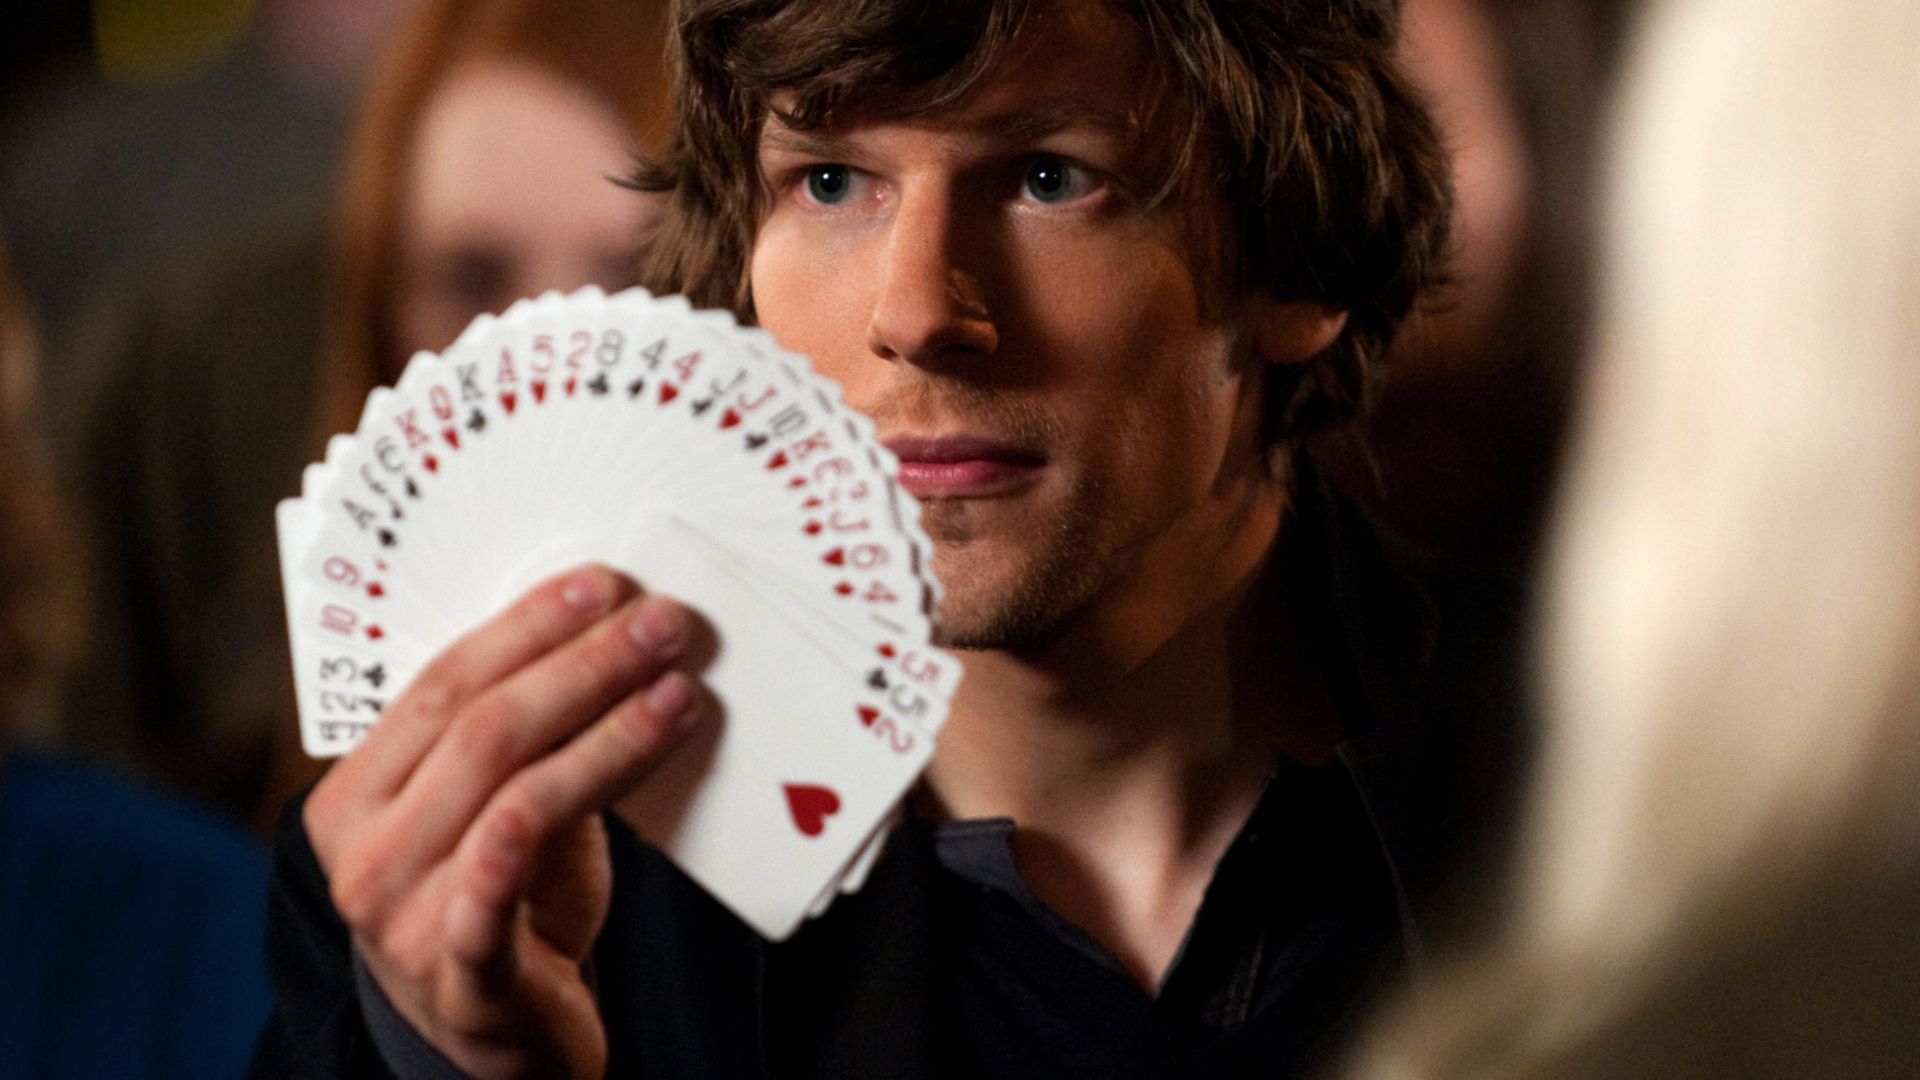 8 years after the last movie, now you see me 3 gets a positive update as barbie and holdovers stars join cast